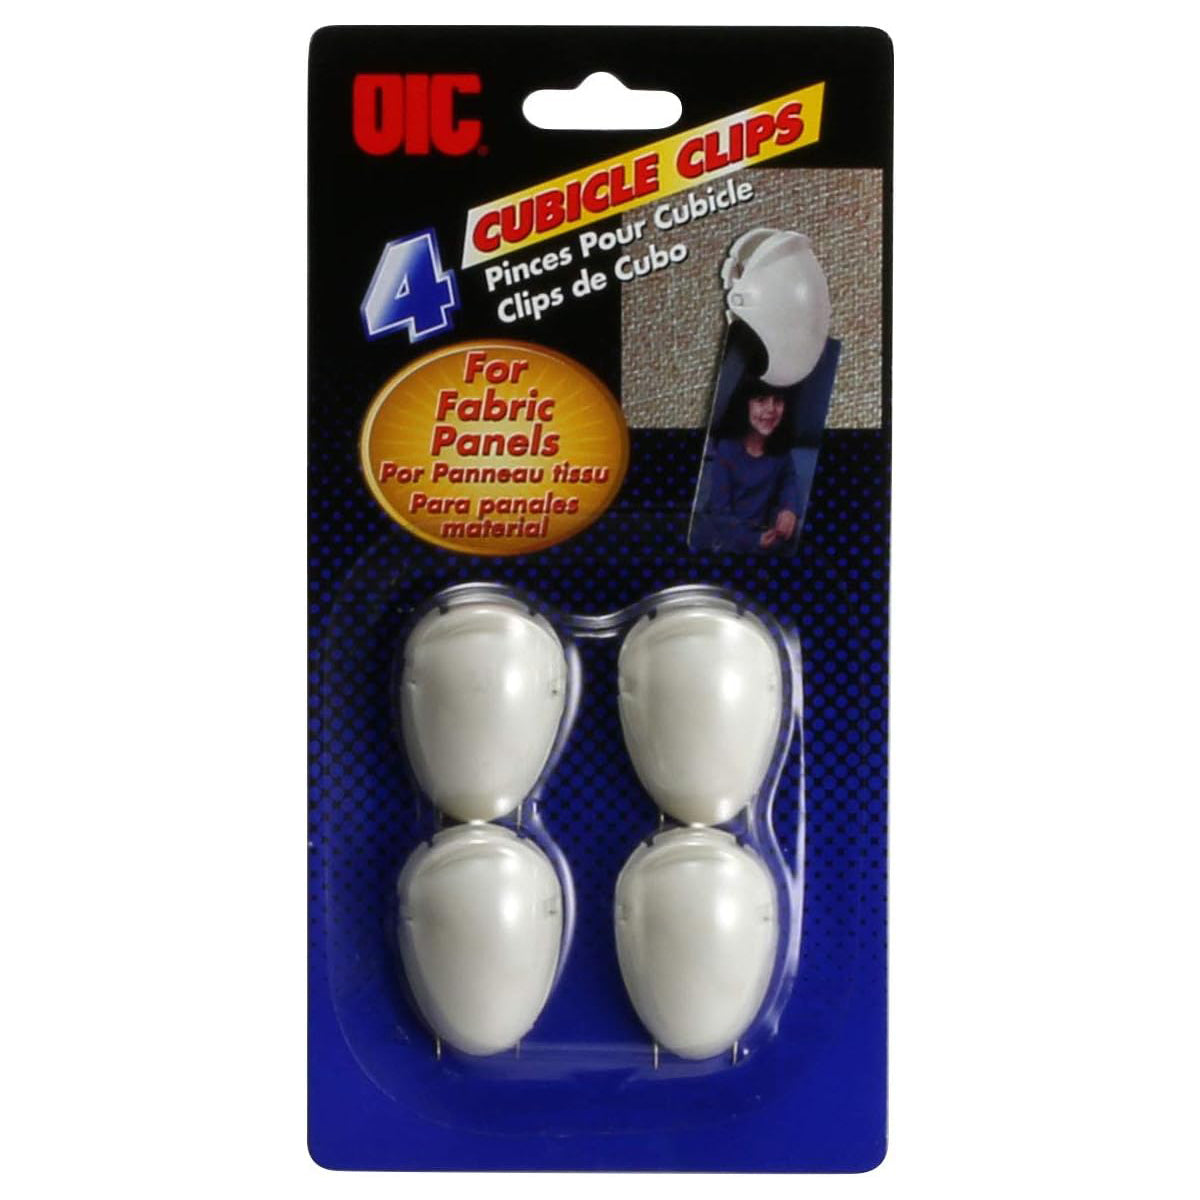 Officemate OIC Cubicle Clips, 4 in A Pack, White (30164)